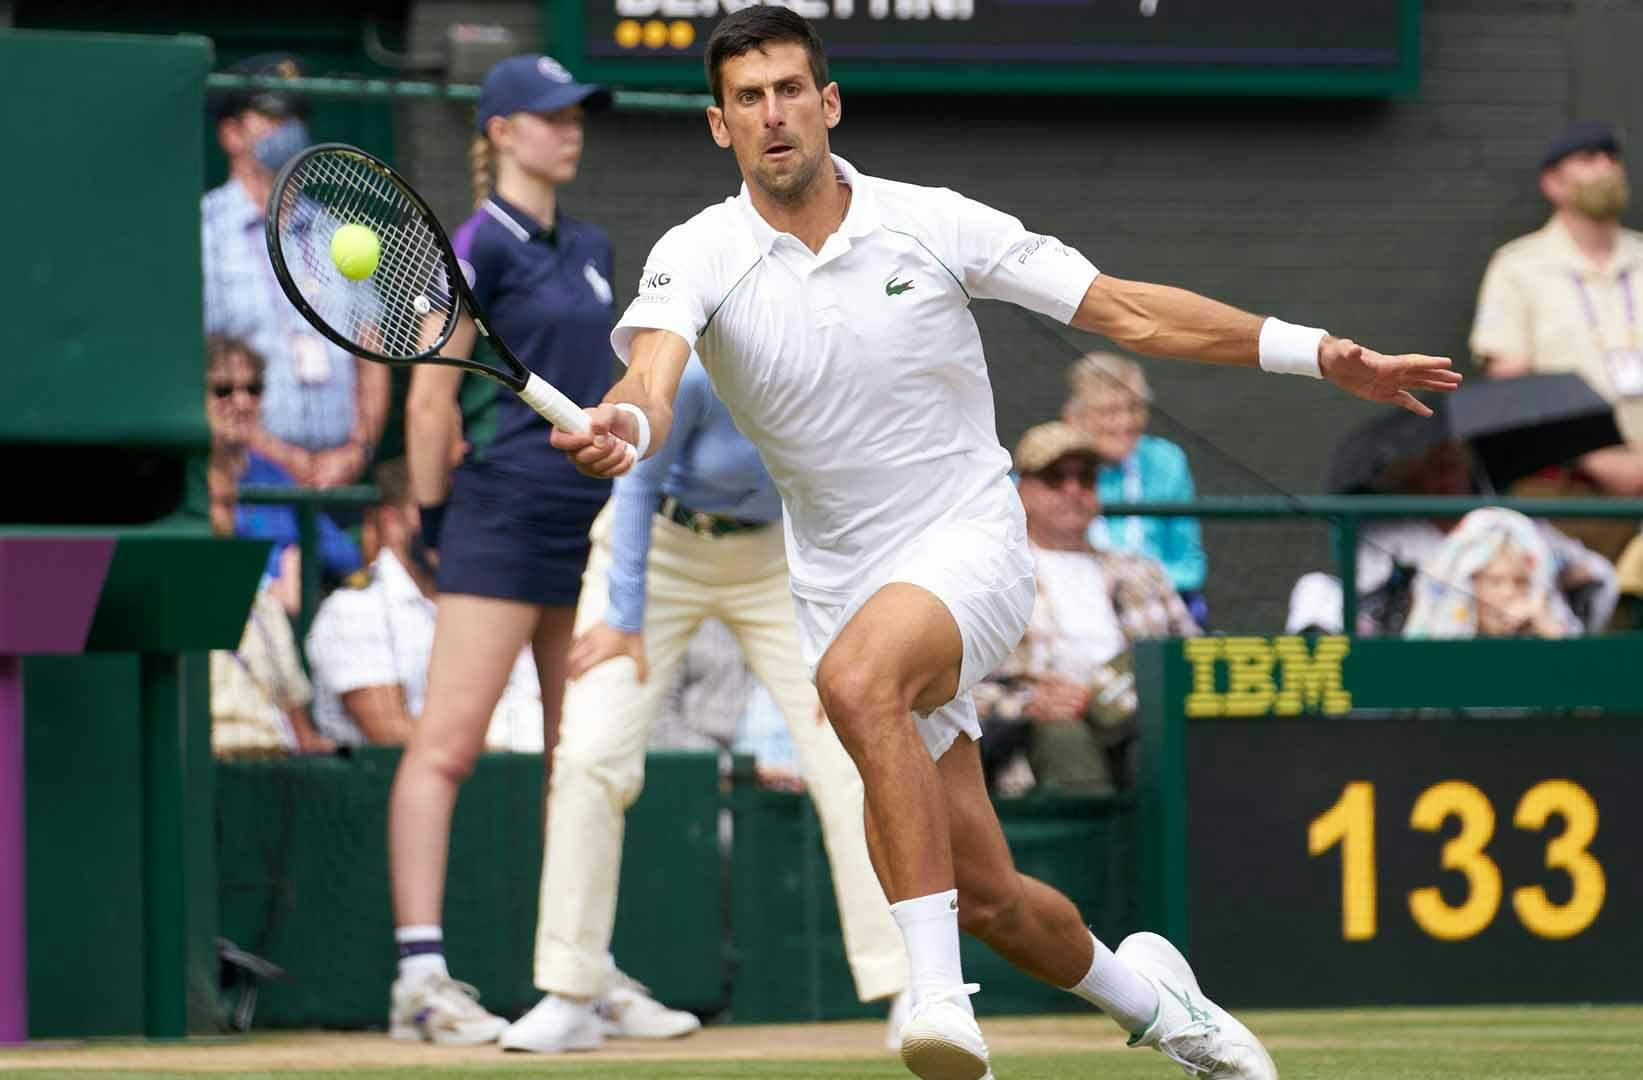 London, United Kingdom; Novak Djokovic (SRB) plays against Matteo Berrettini (ITA) in the men’s final on Centre Court at All England Lawn Tennis and Croquet Club. - USA TODAY Sports